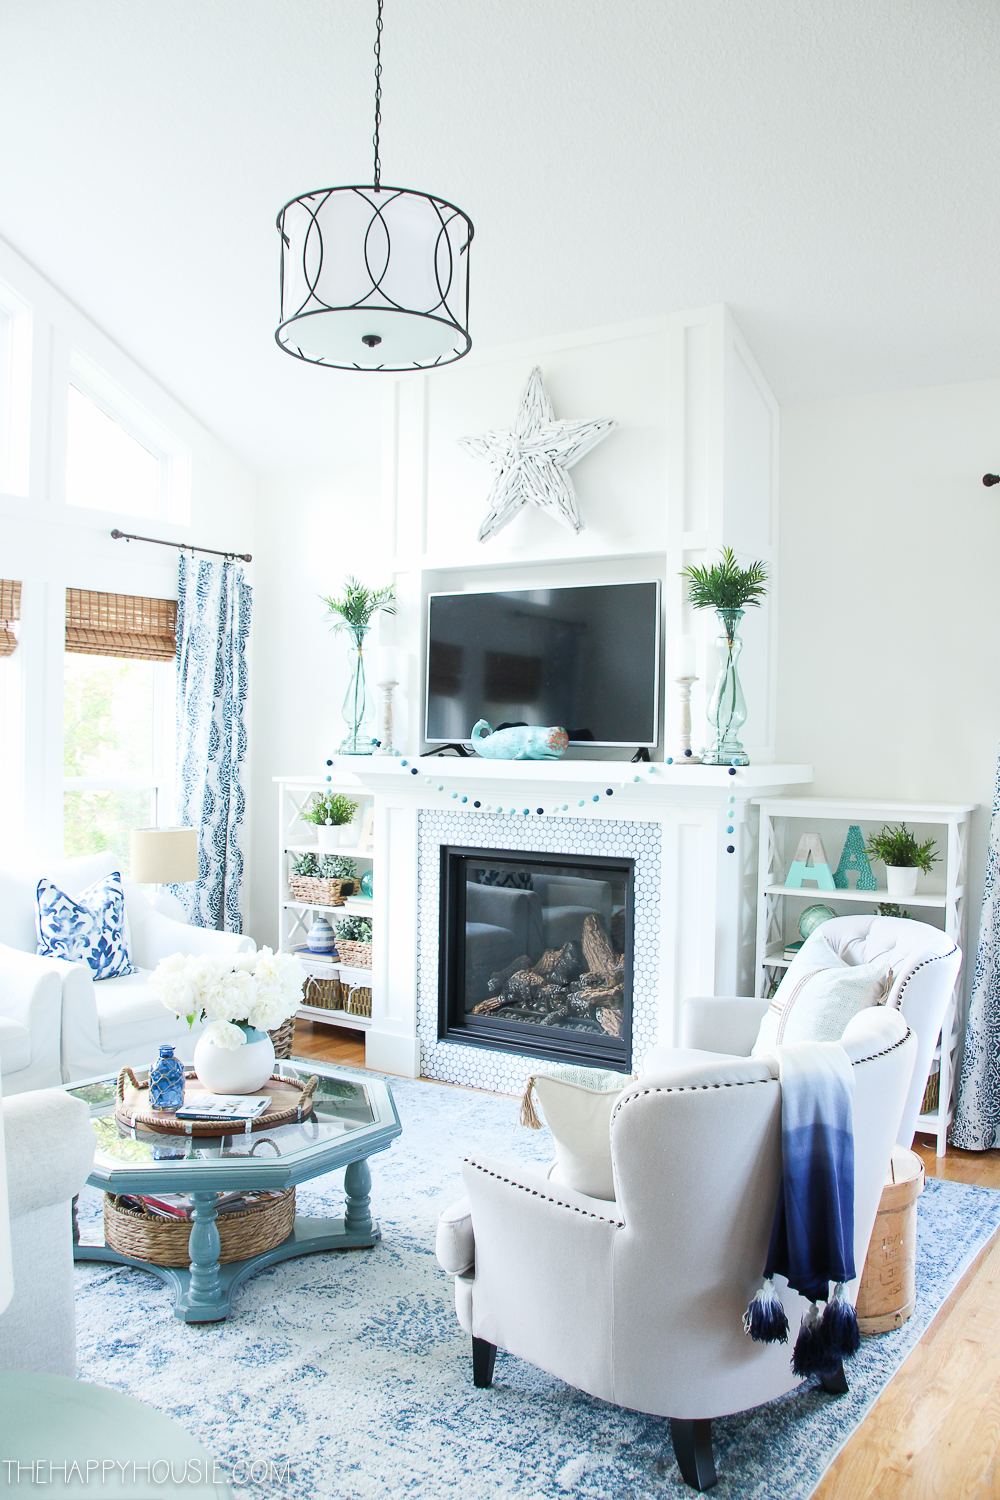 A white fireplace in the living room.